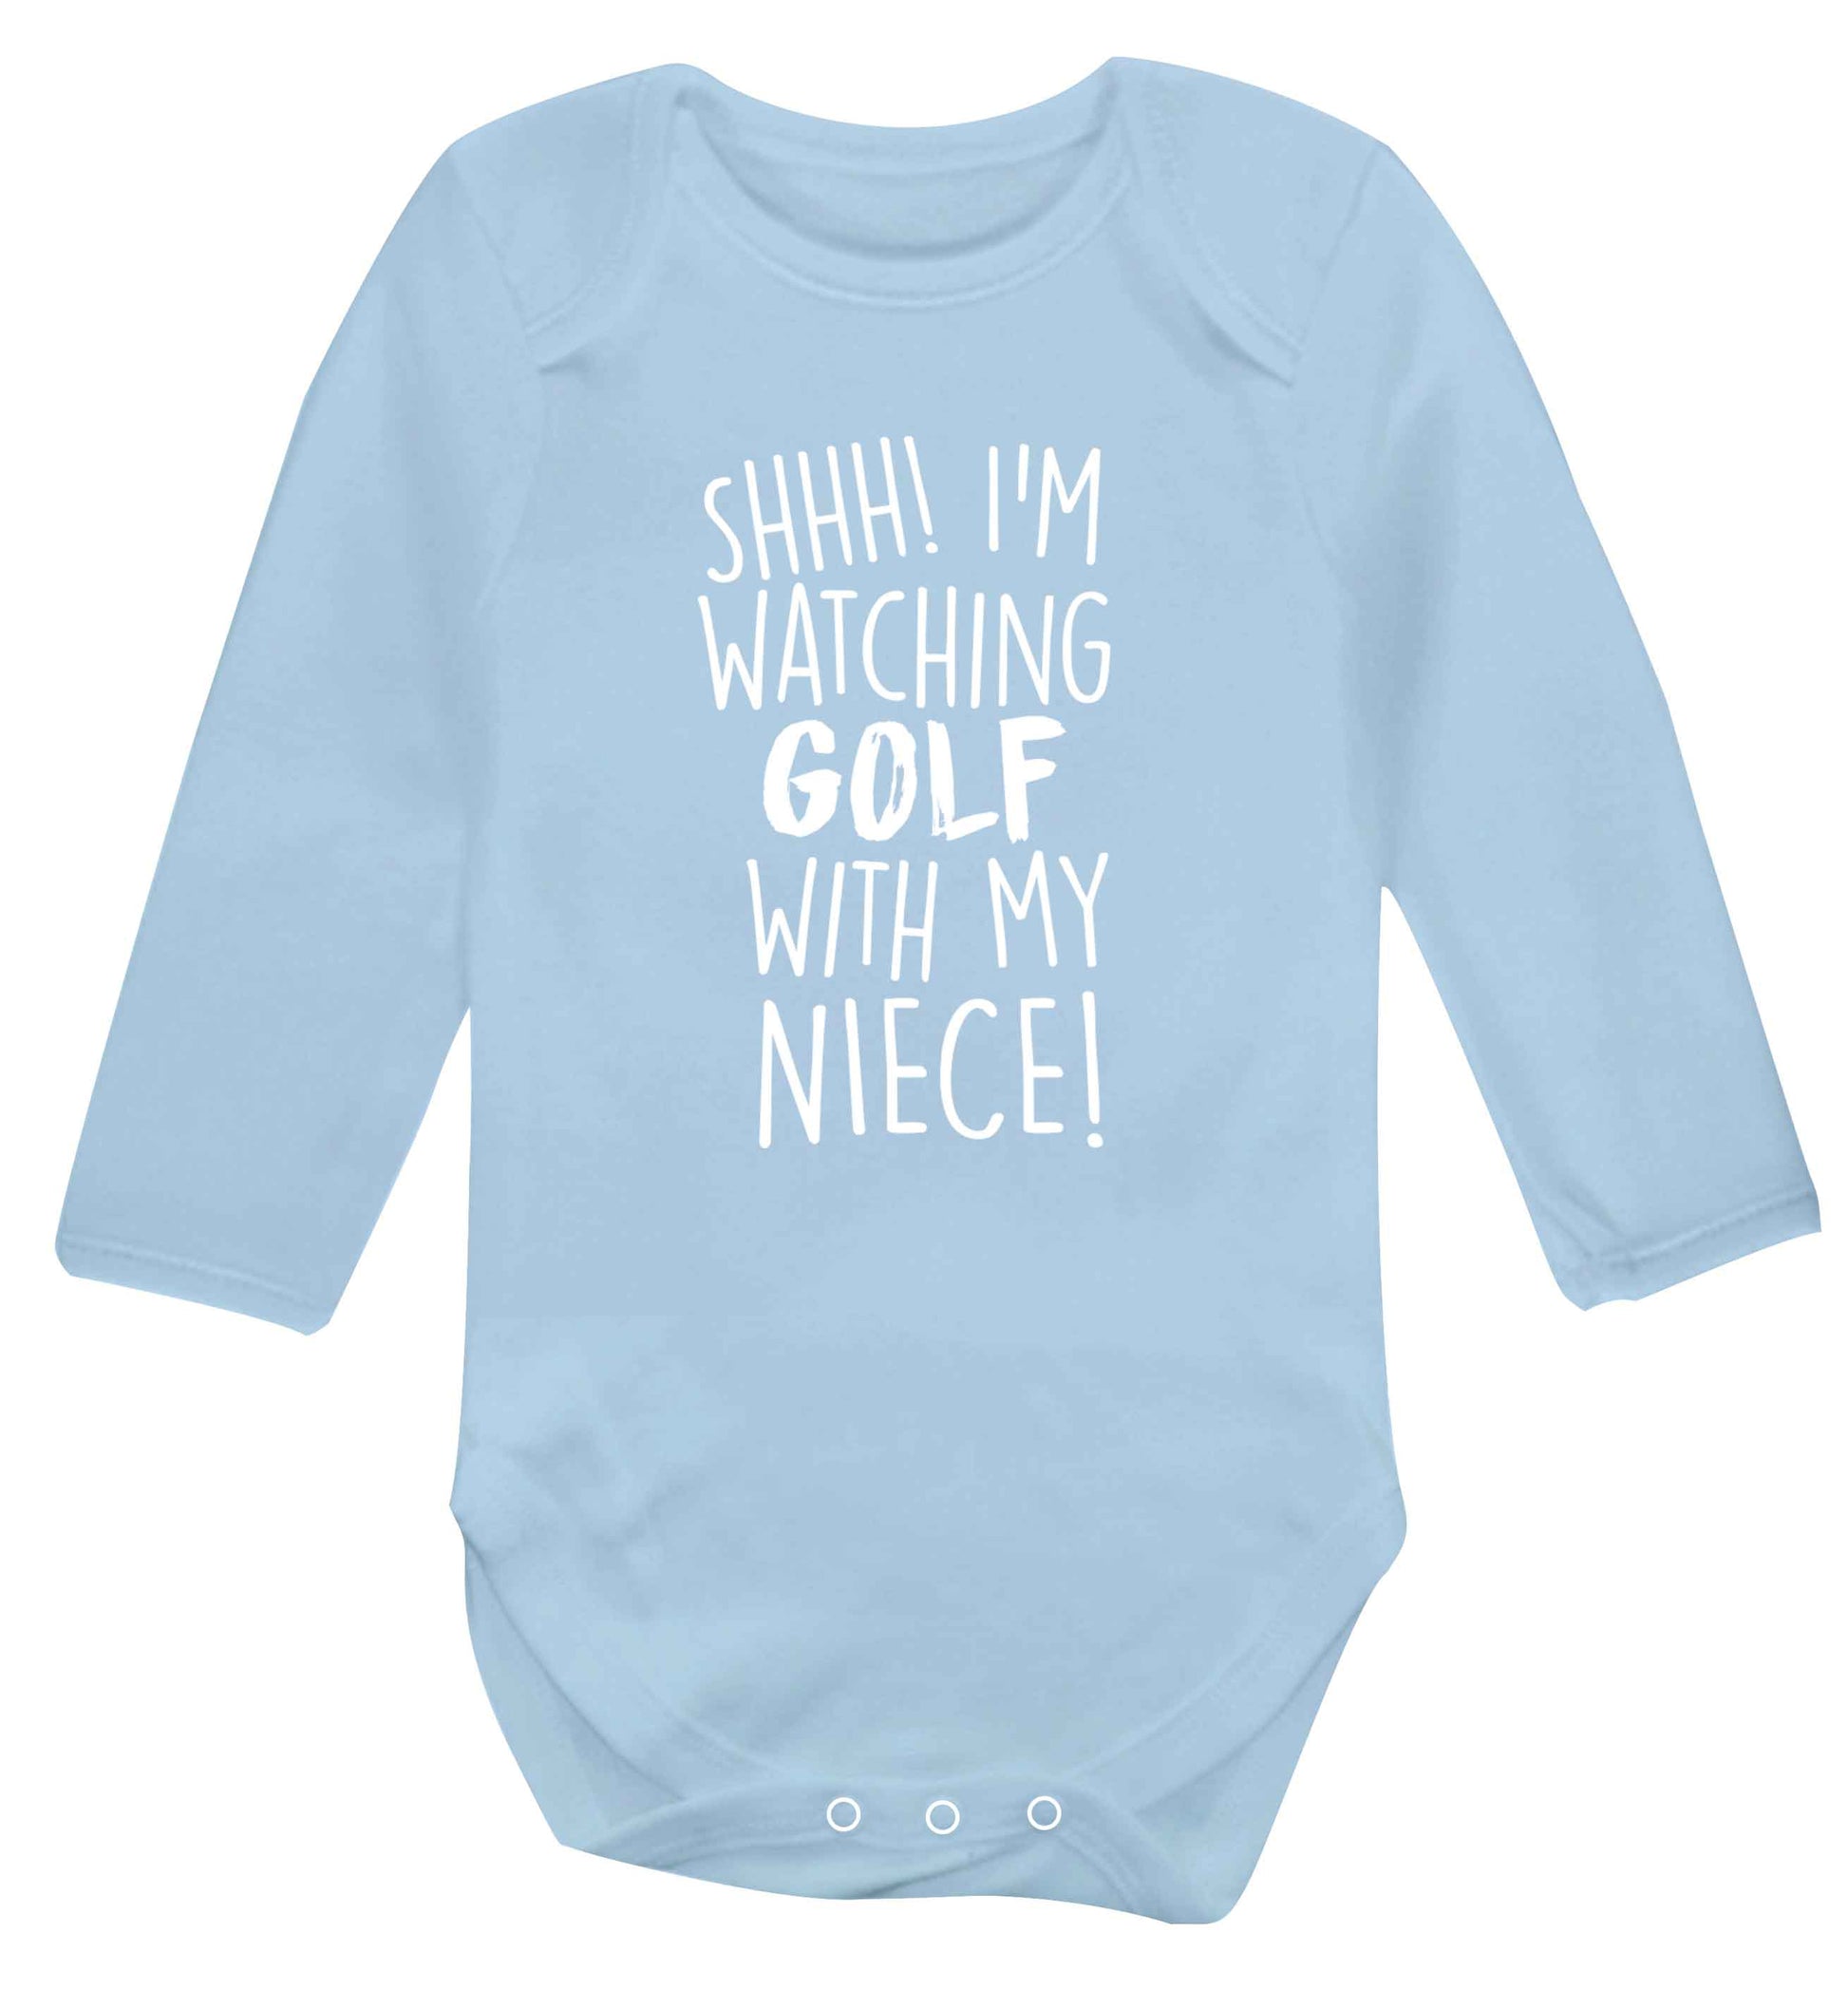 Shh I'm watching golf with my niece Baby Vest long sleeved pale blue 6-12 months